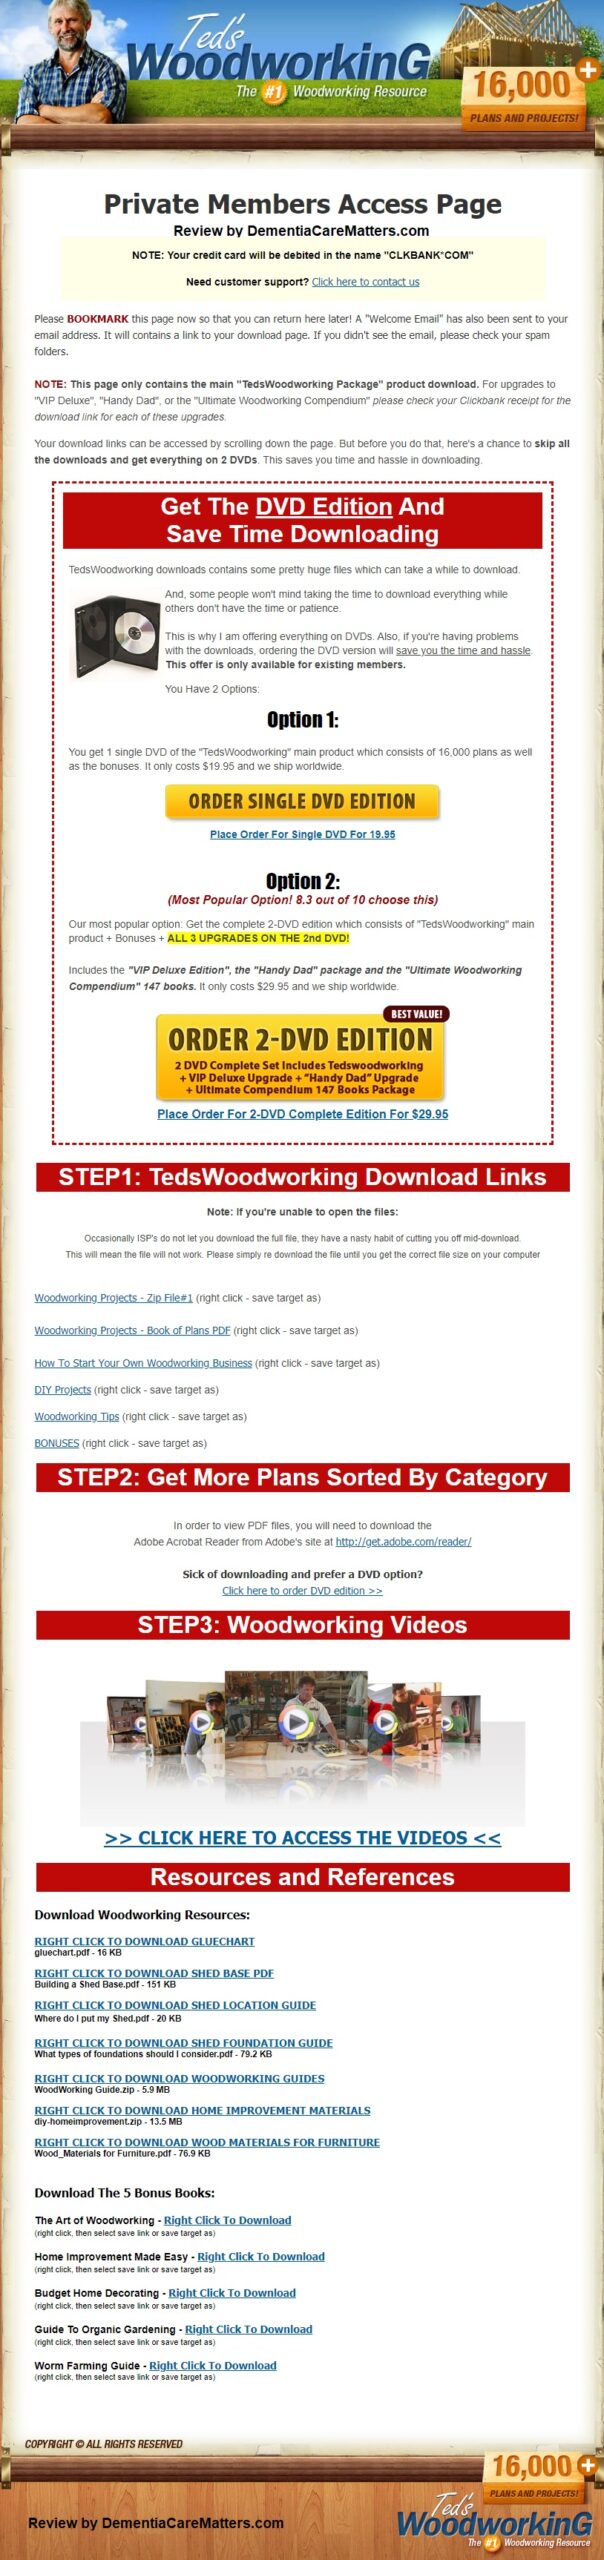 ted's woodworking download page